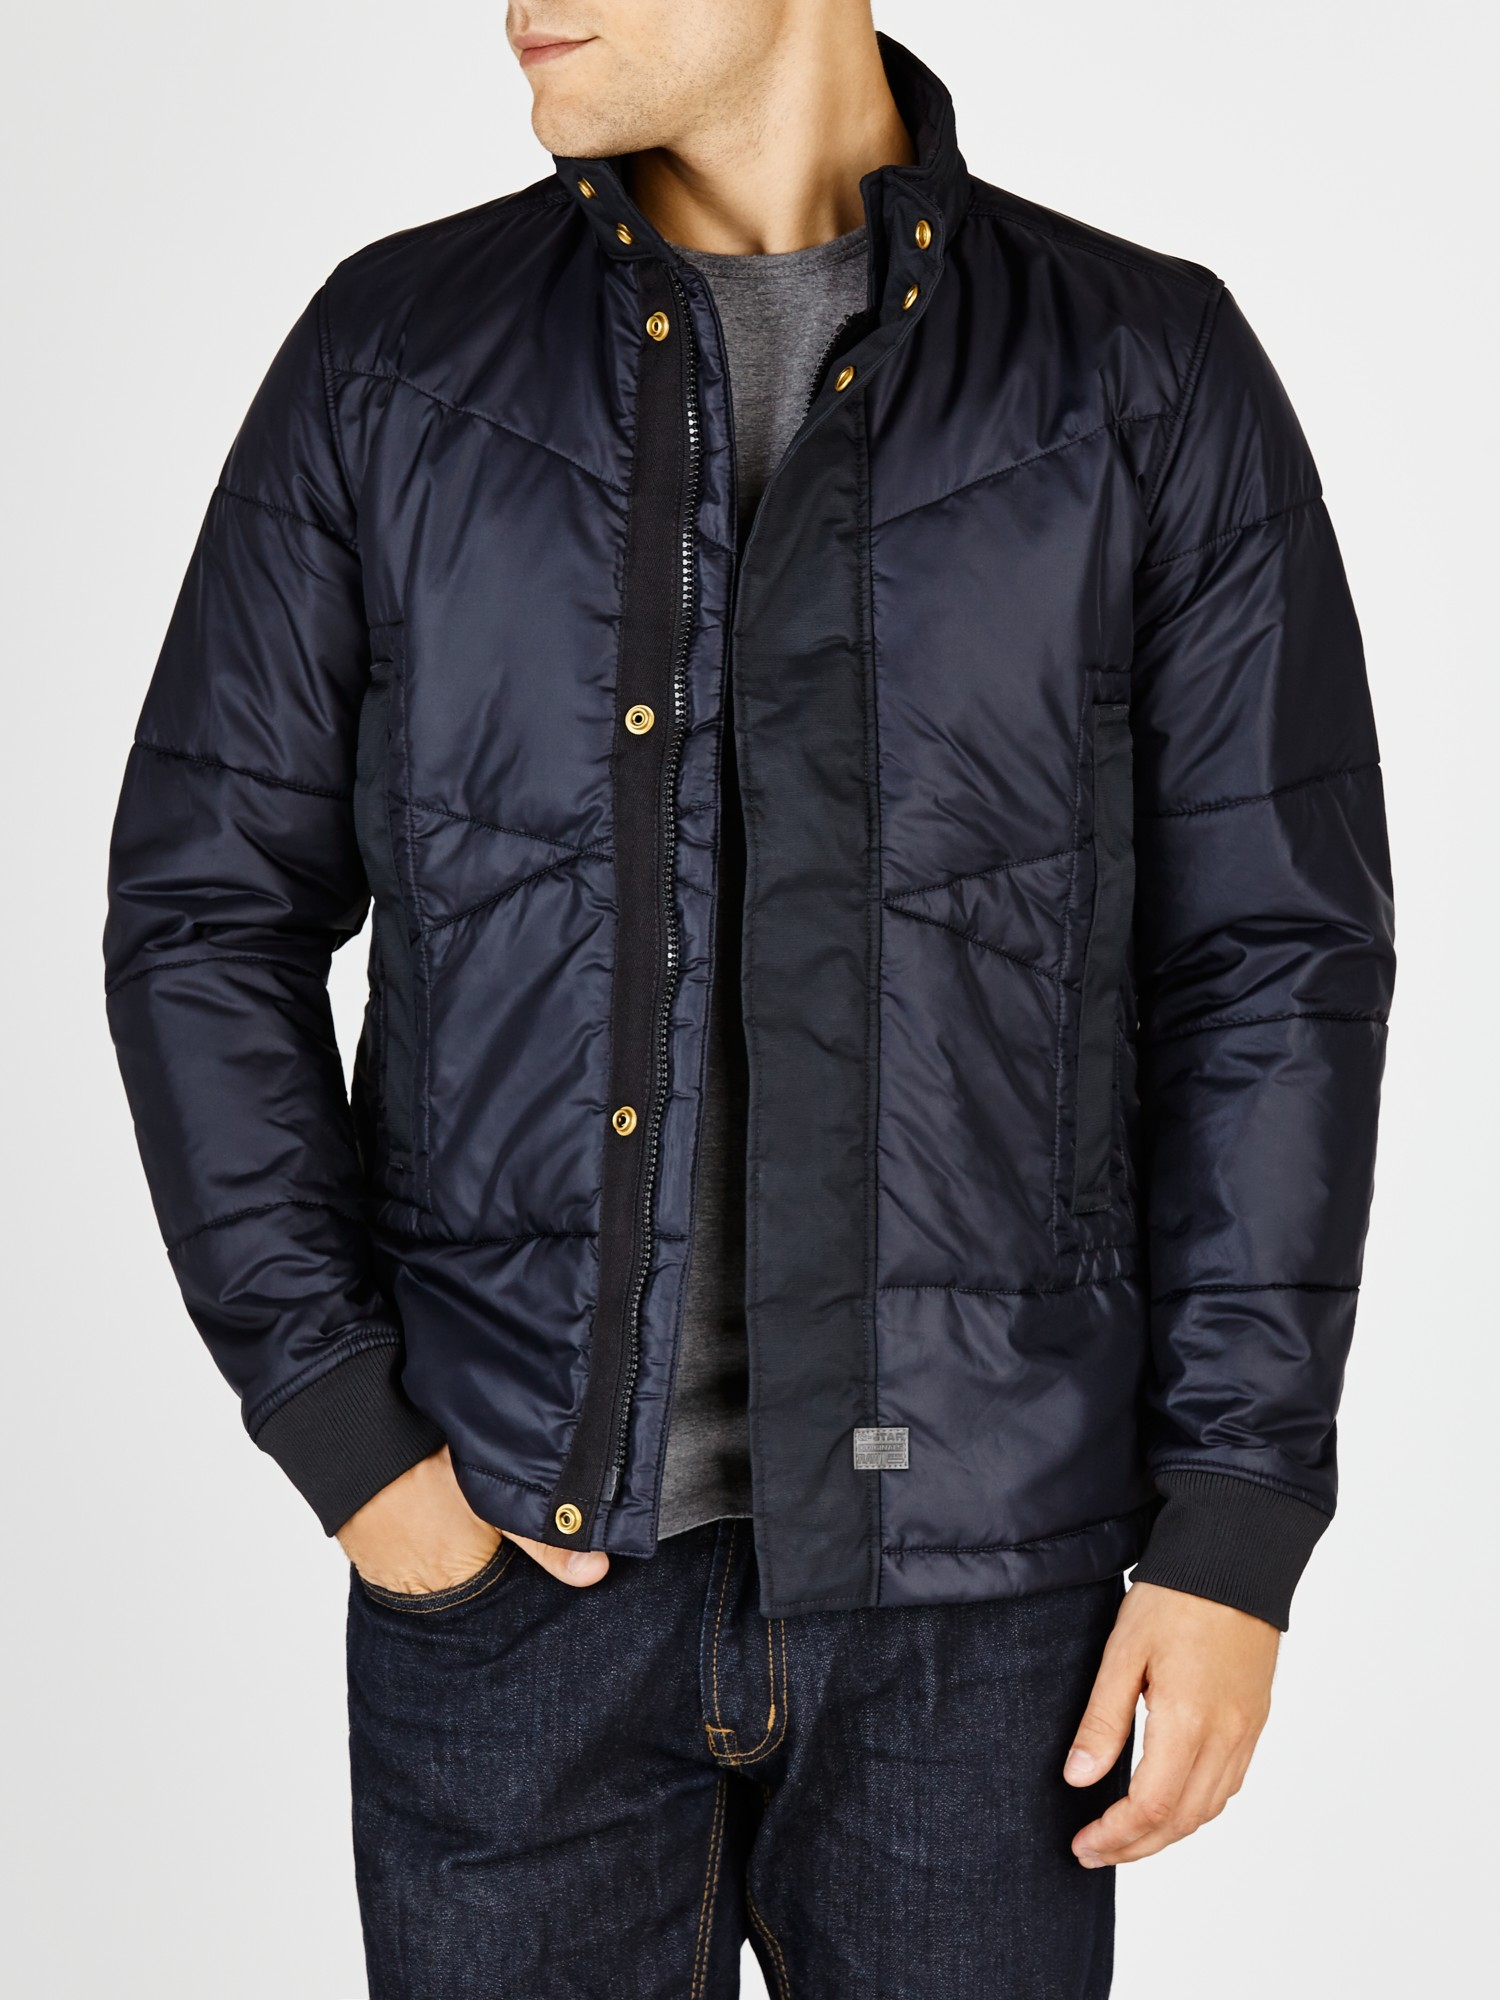 G-Star RAW Synthetic Tamson Quilted Overshirt Jacket in Blue for Men - Lyst